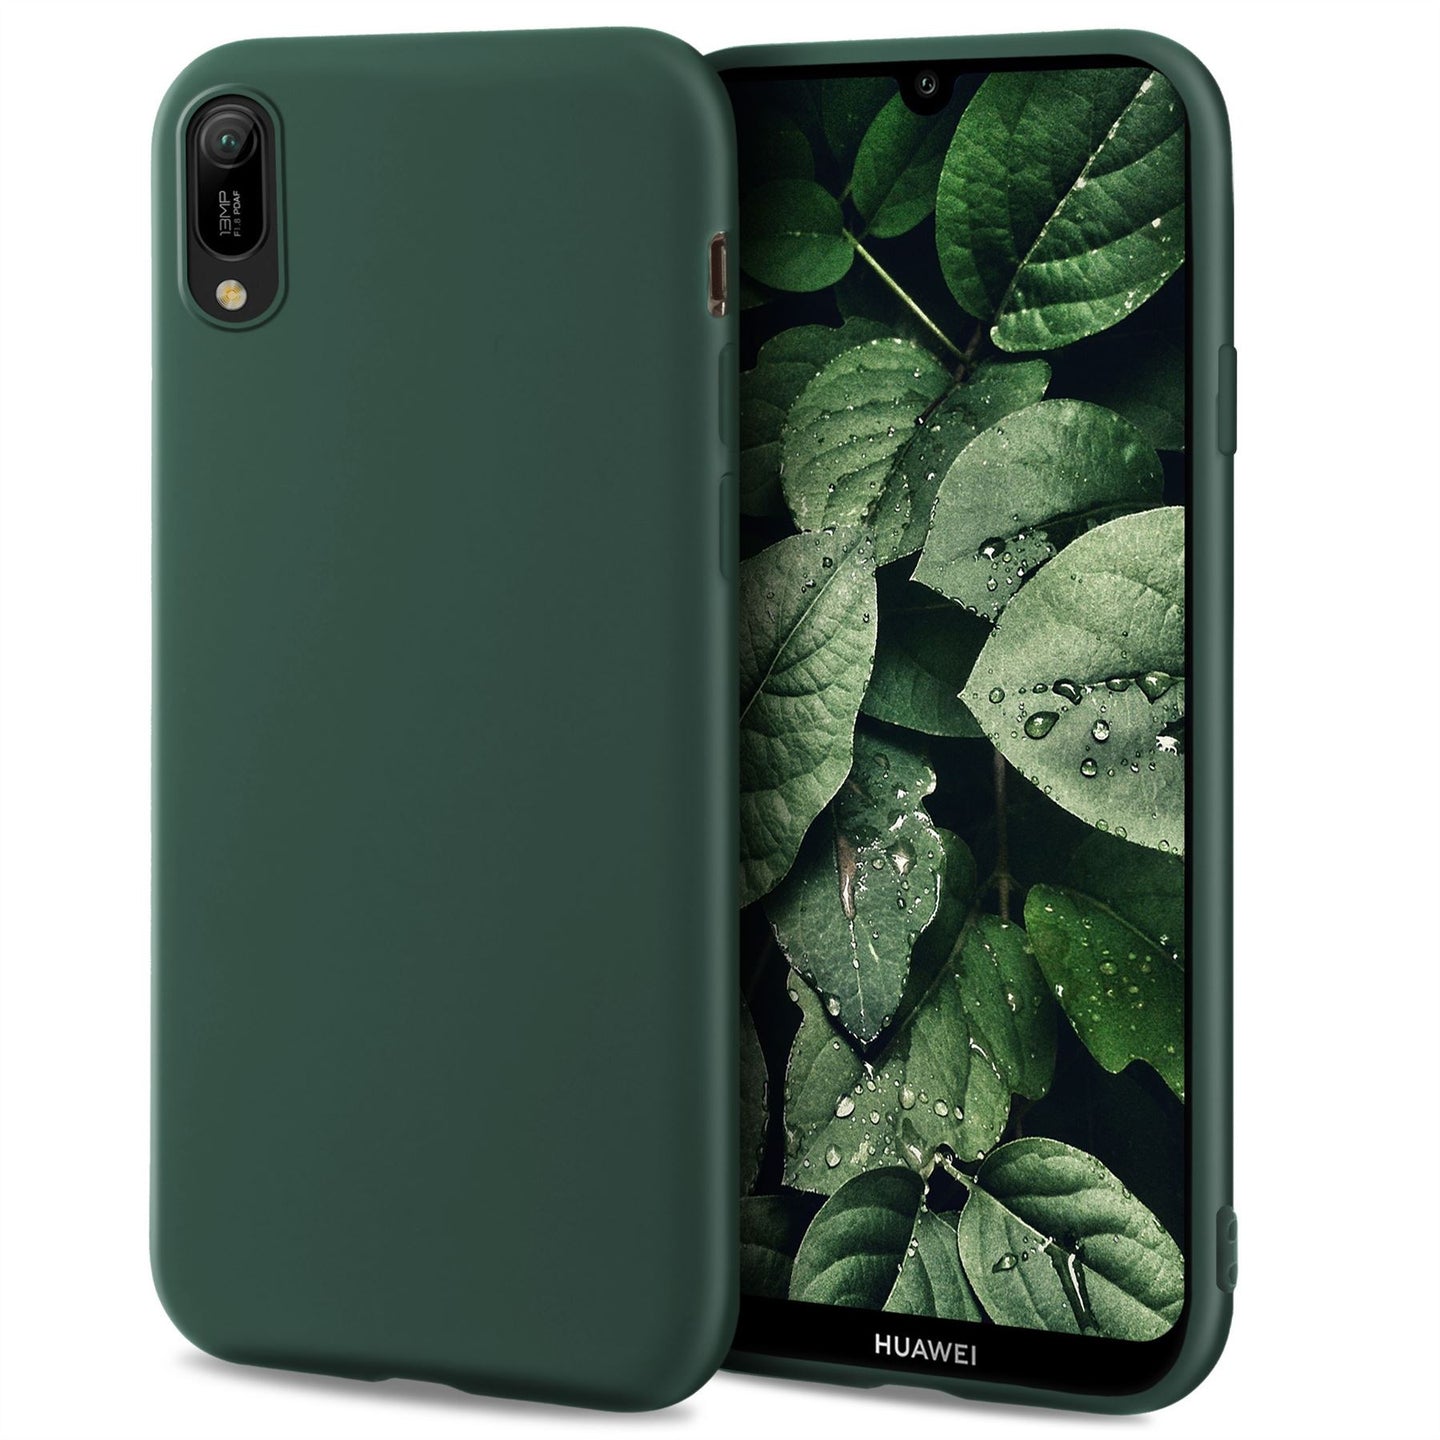 Moozy Minimalist Series Silicone Case for Huawei Y6 2019, Midnight Green - Matte Finish Slim Soft TPU Cover